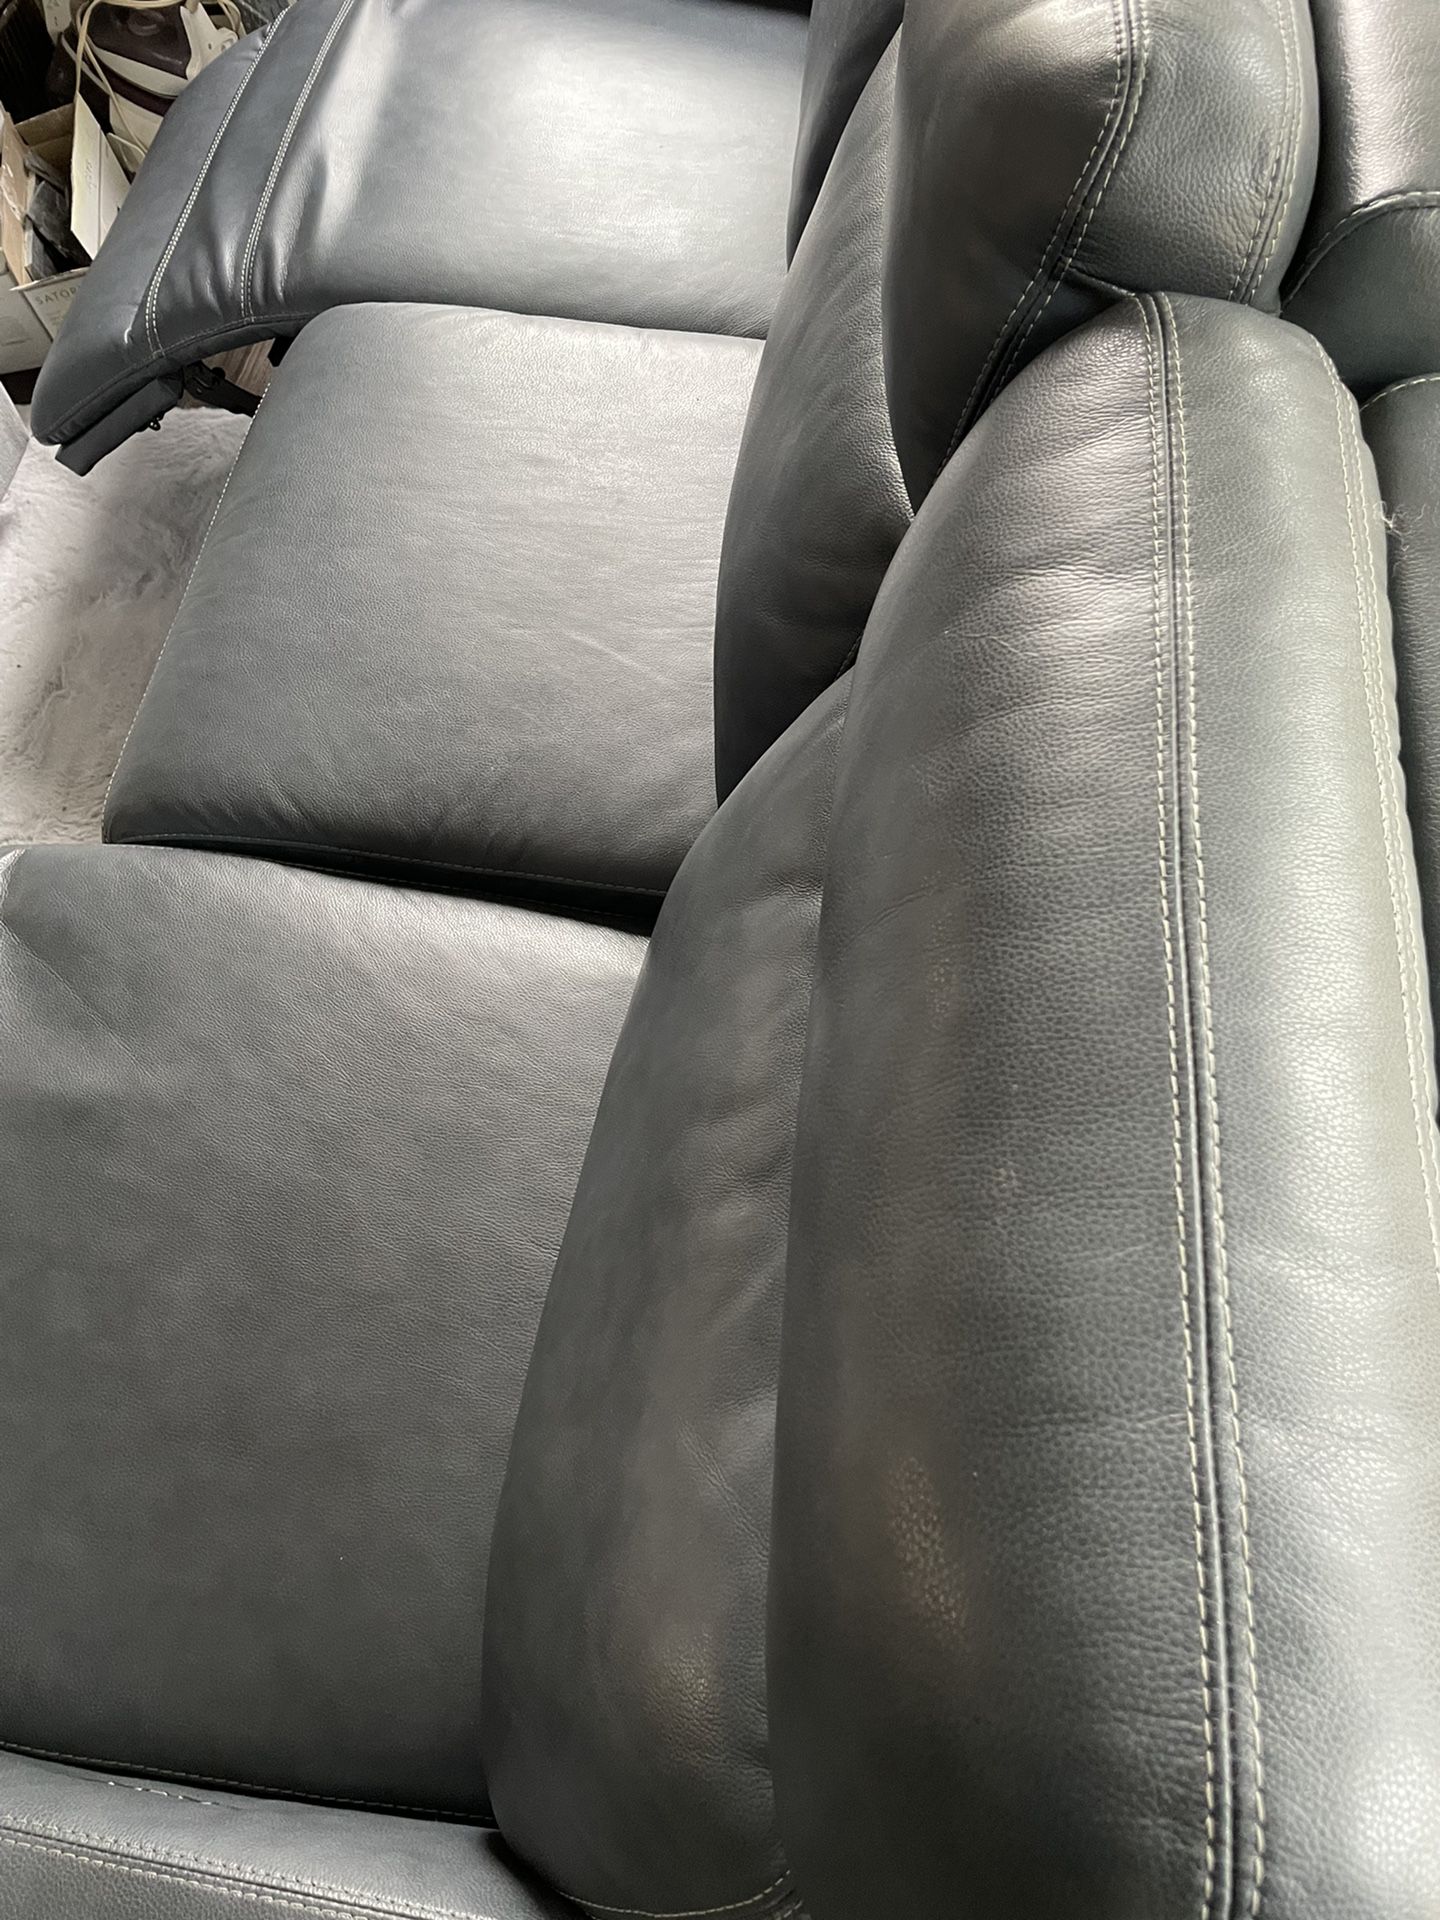 New Cardis Leather Couch  Both Sides Recline Head Also Moves 